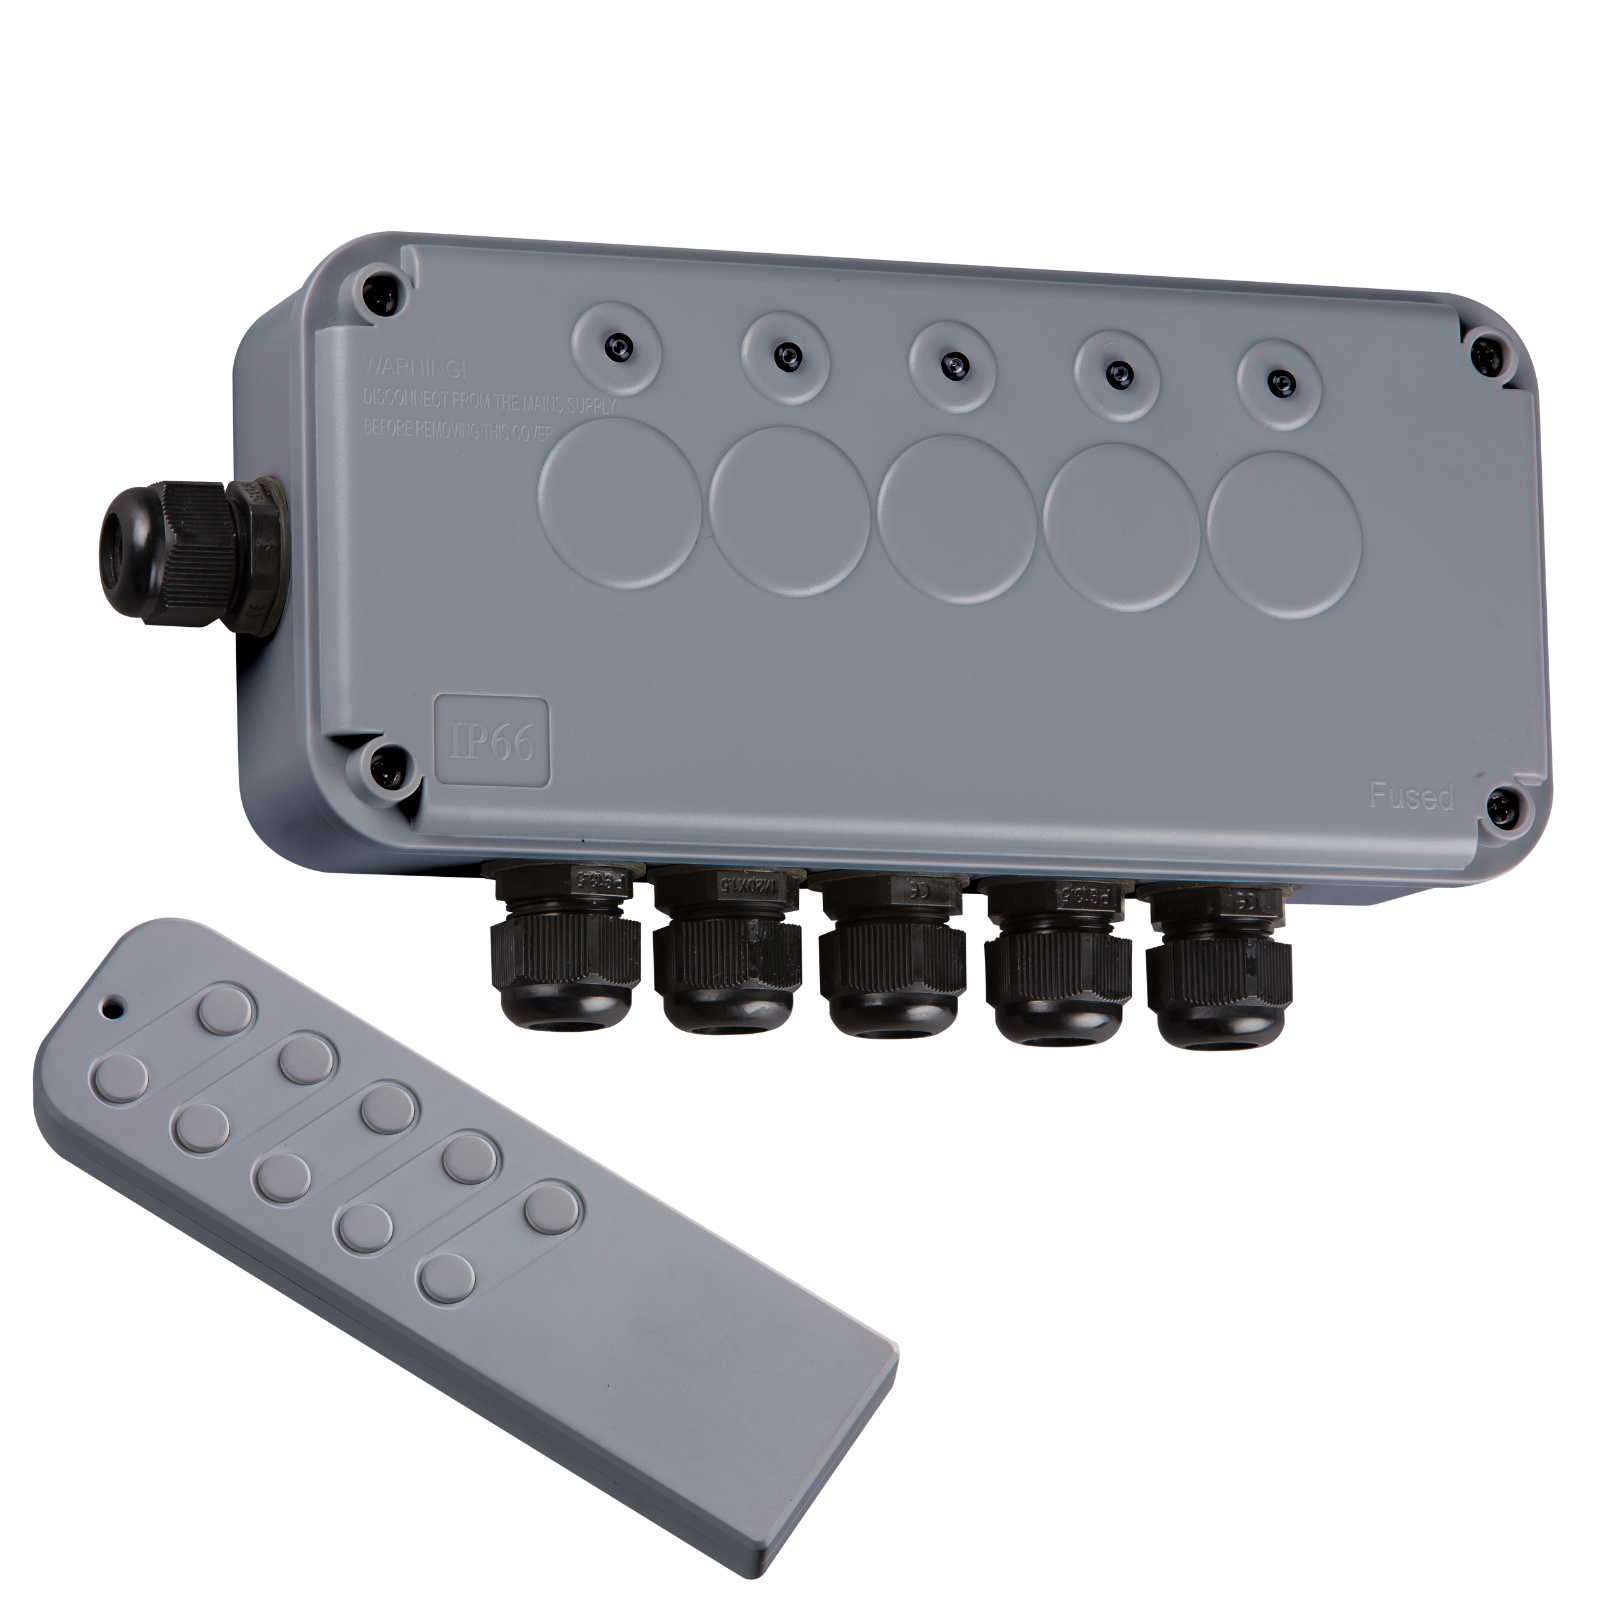 IP66 5G Remote Switch Box - IP665G - SOLD-OUT!! 